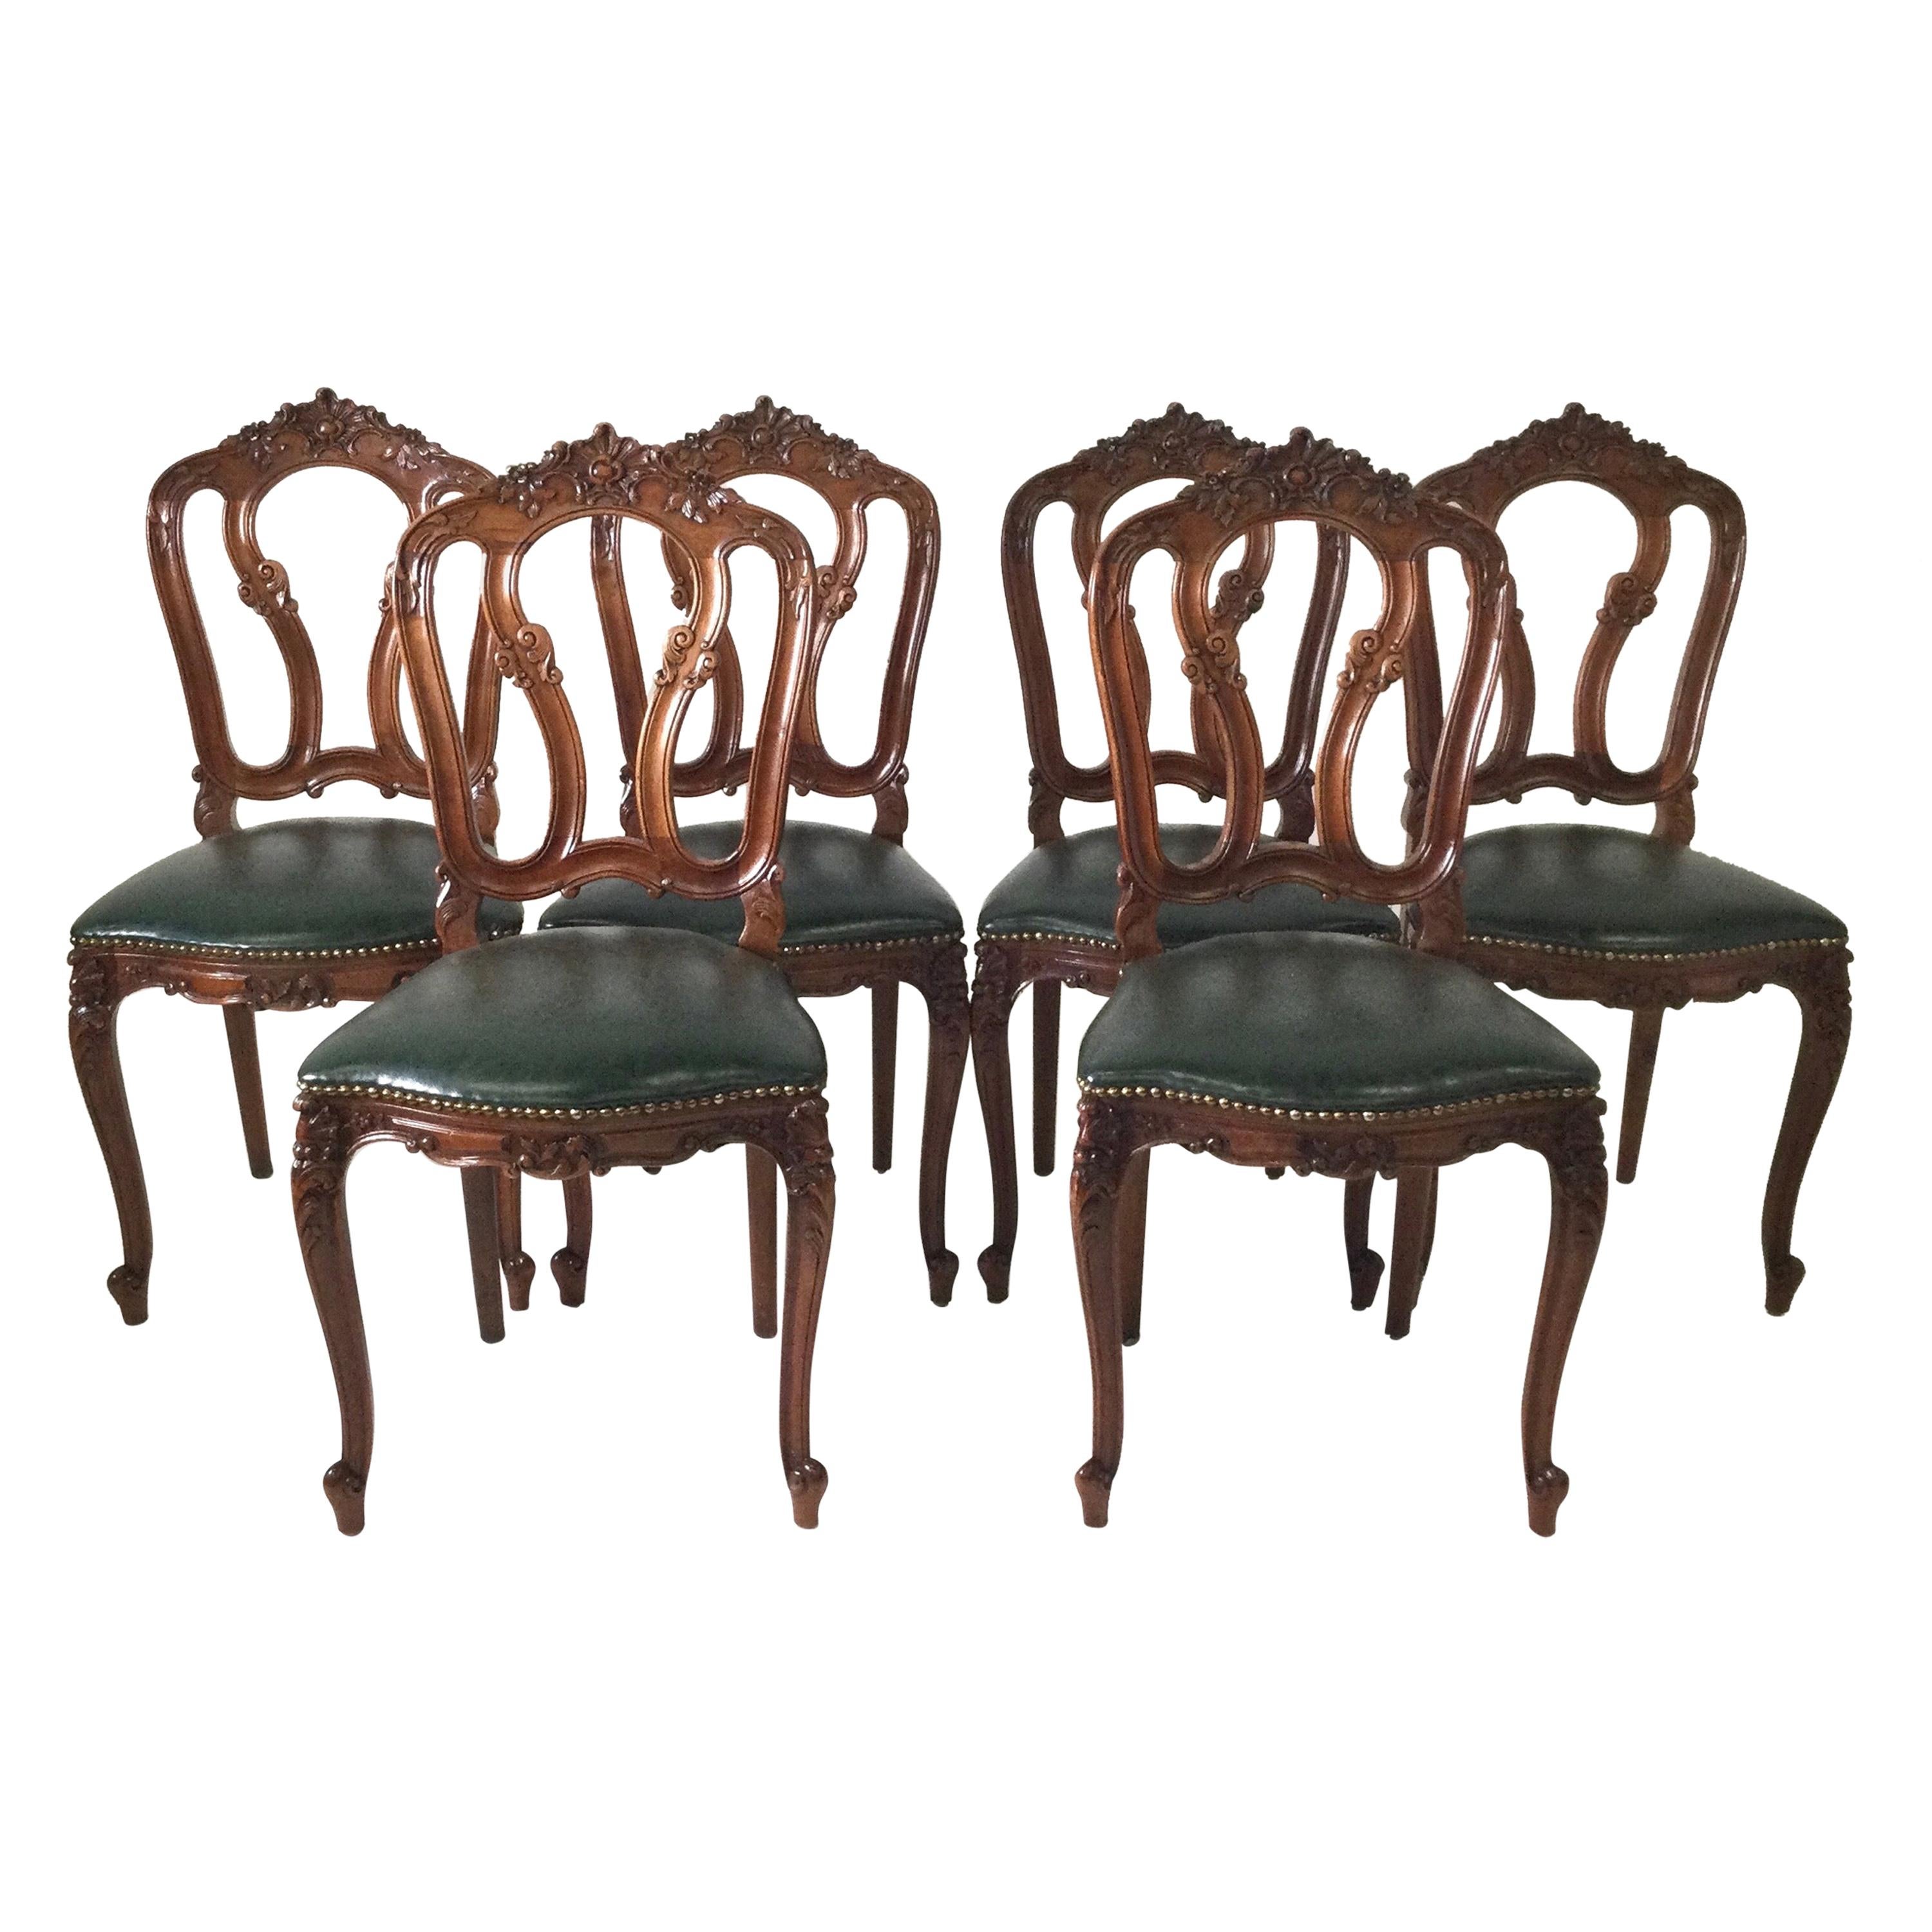 Set of Six Carved French Style Walnut Chairs with Green Leather Seats circa 1900